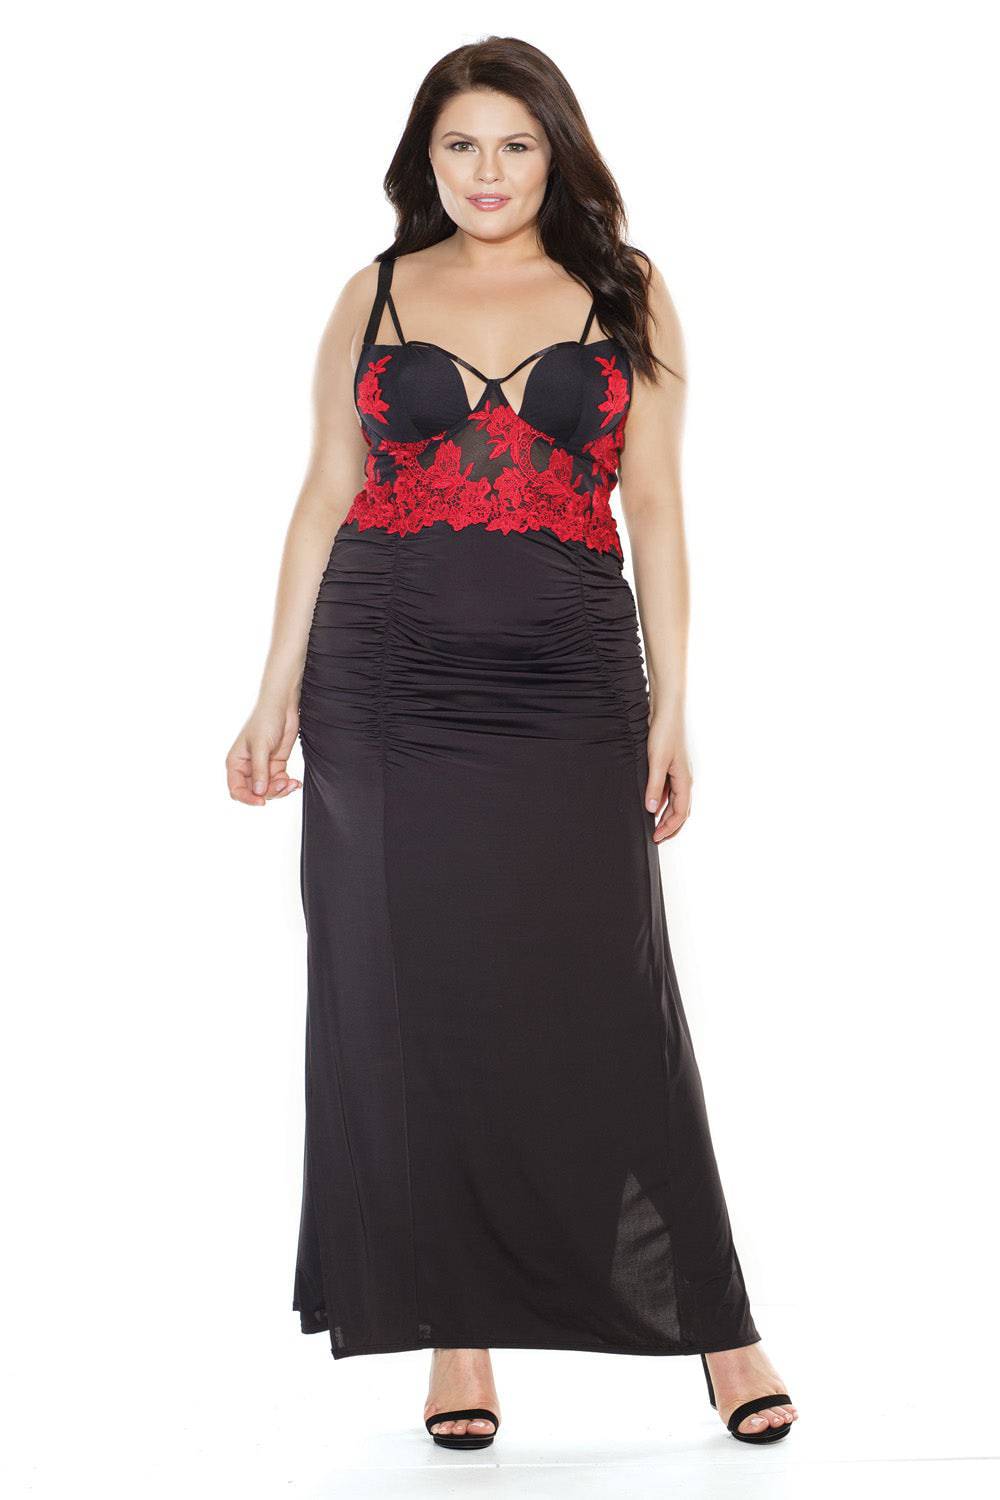 Coquette - 3870X - Plus Size Embroidered Gown - Black/Red - Stag Shop